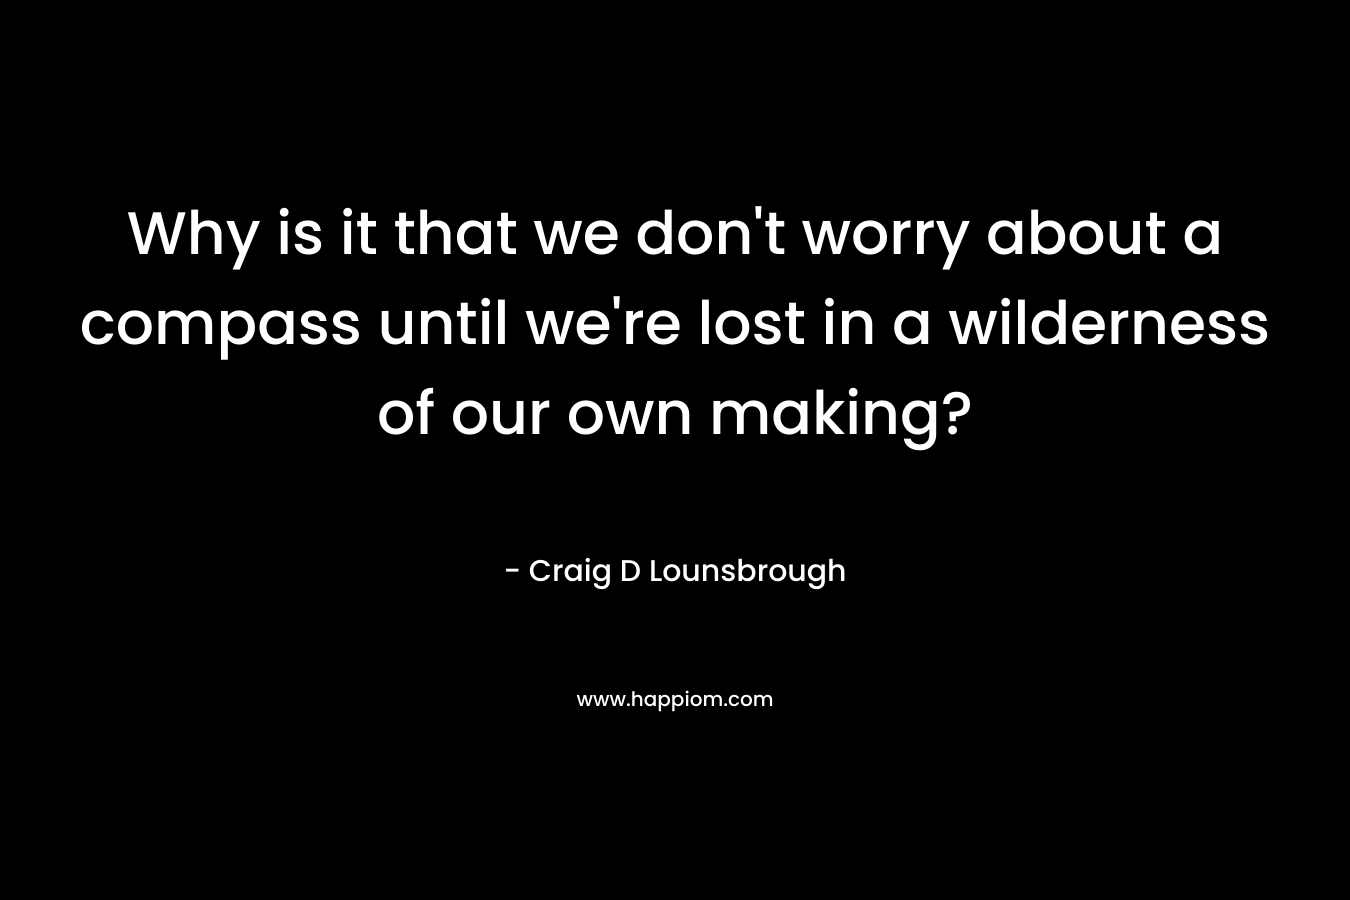 Why is it that we don't worry about a compass until we're lost in a wilderness of our own making?